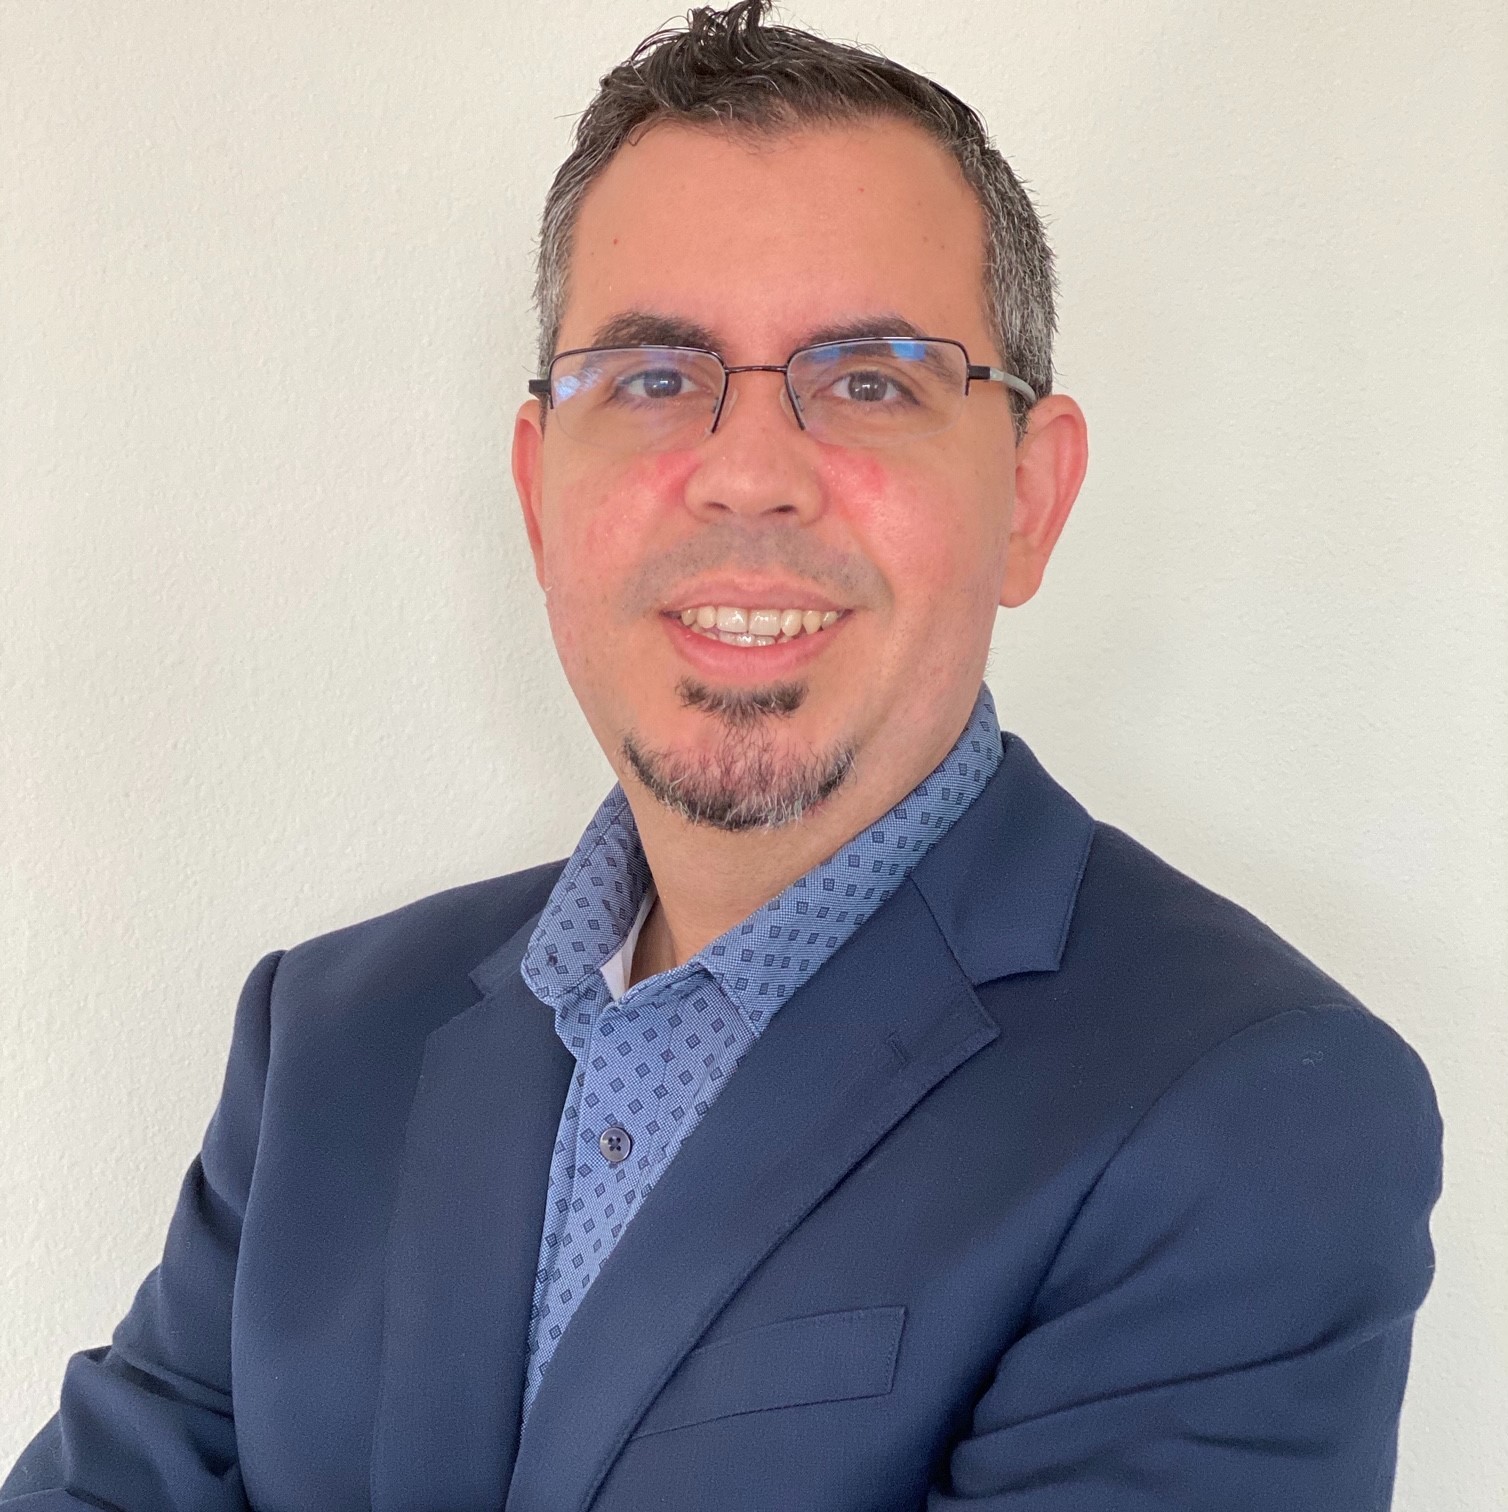 Courtesy. Omar Gonzalez will serve as corporate director of Bayfront Health St. Petersburg's IT and clinical engineering departments.